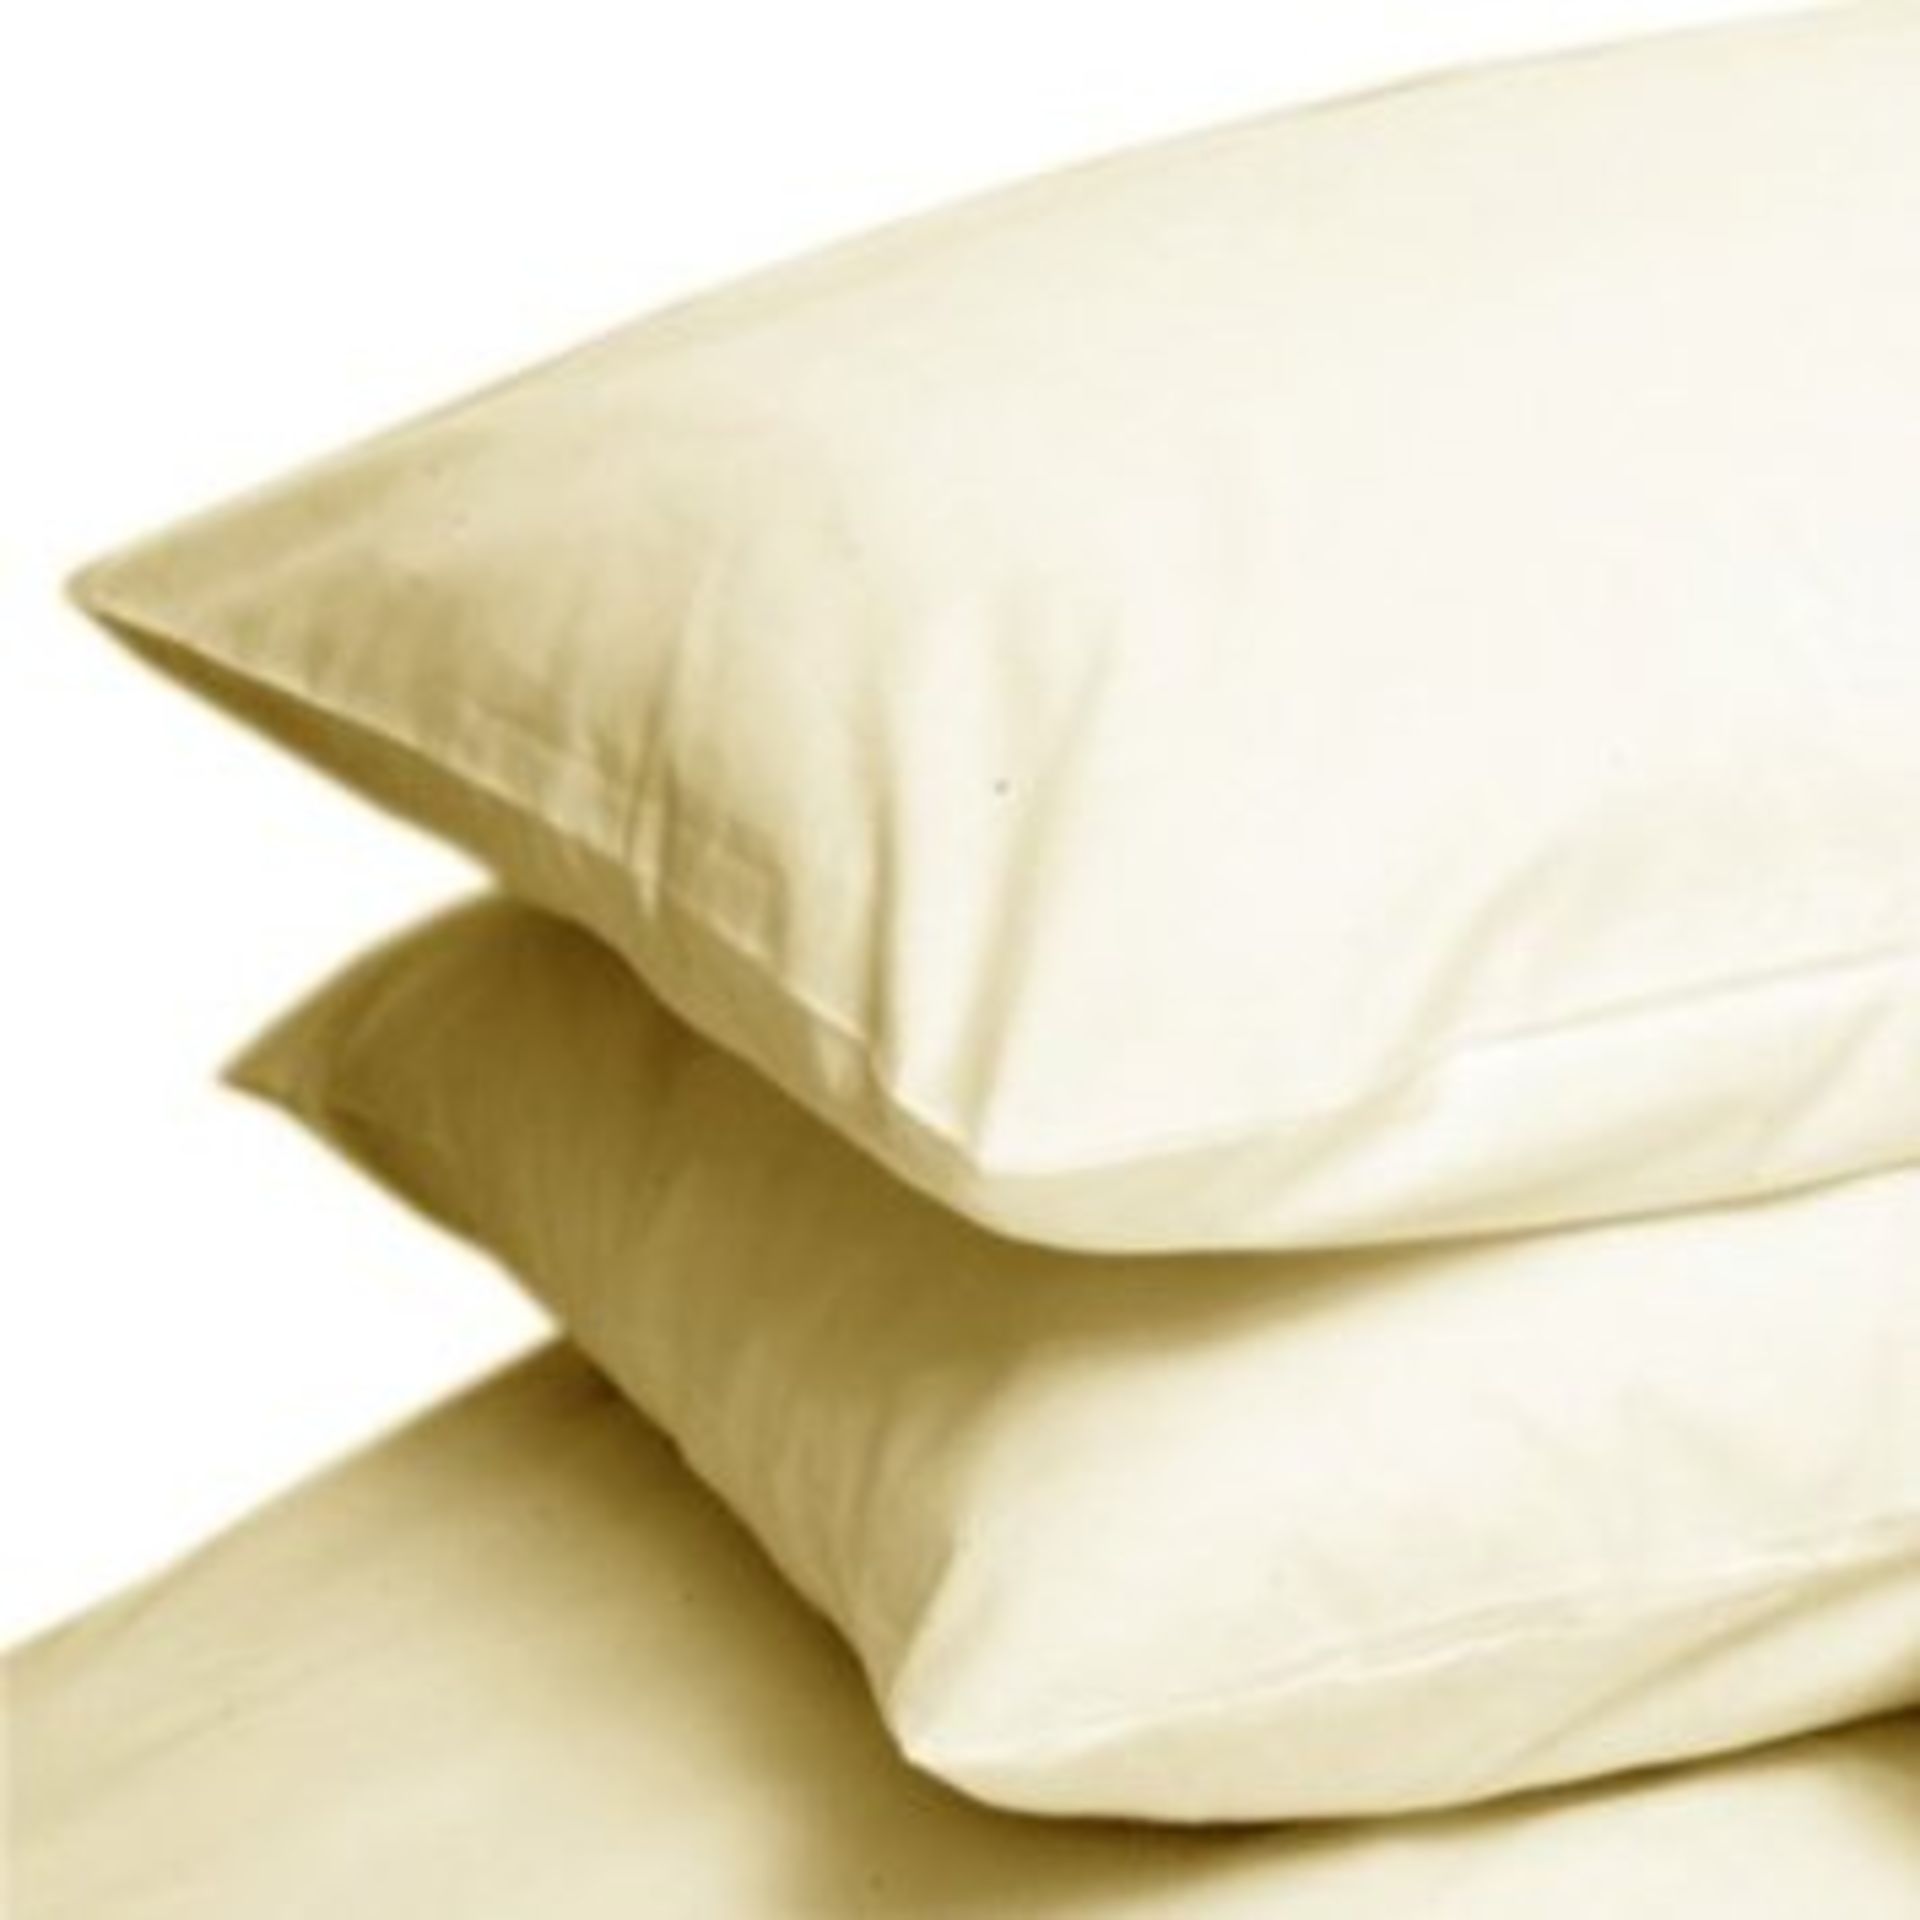 V *TRADE QTY* Brand New Sleep & Dream Pair Of Luxury Percale Plain Dyed Pillowcases 20"x30" Approx X